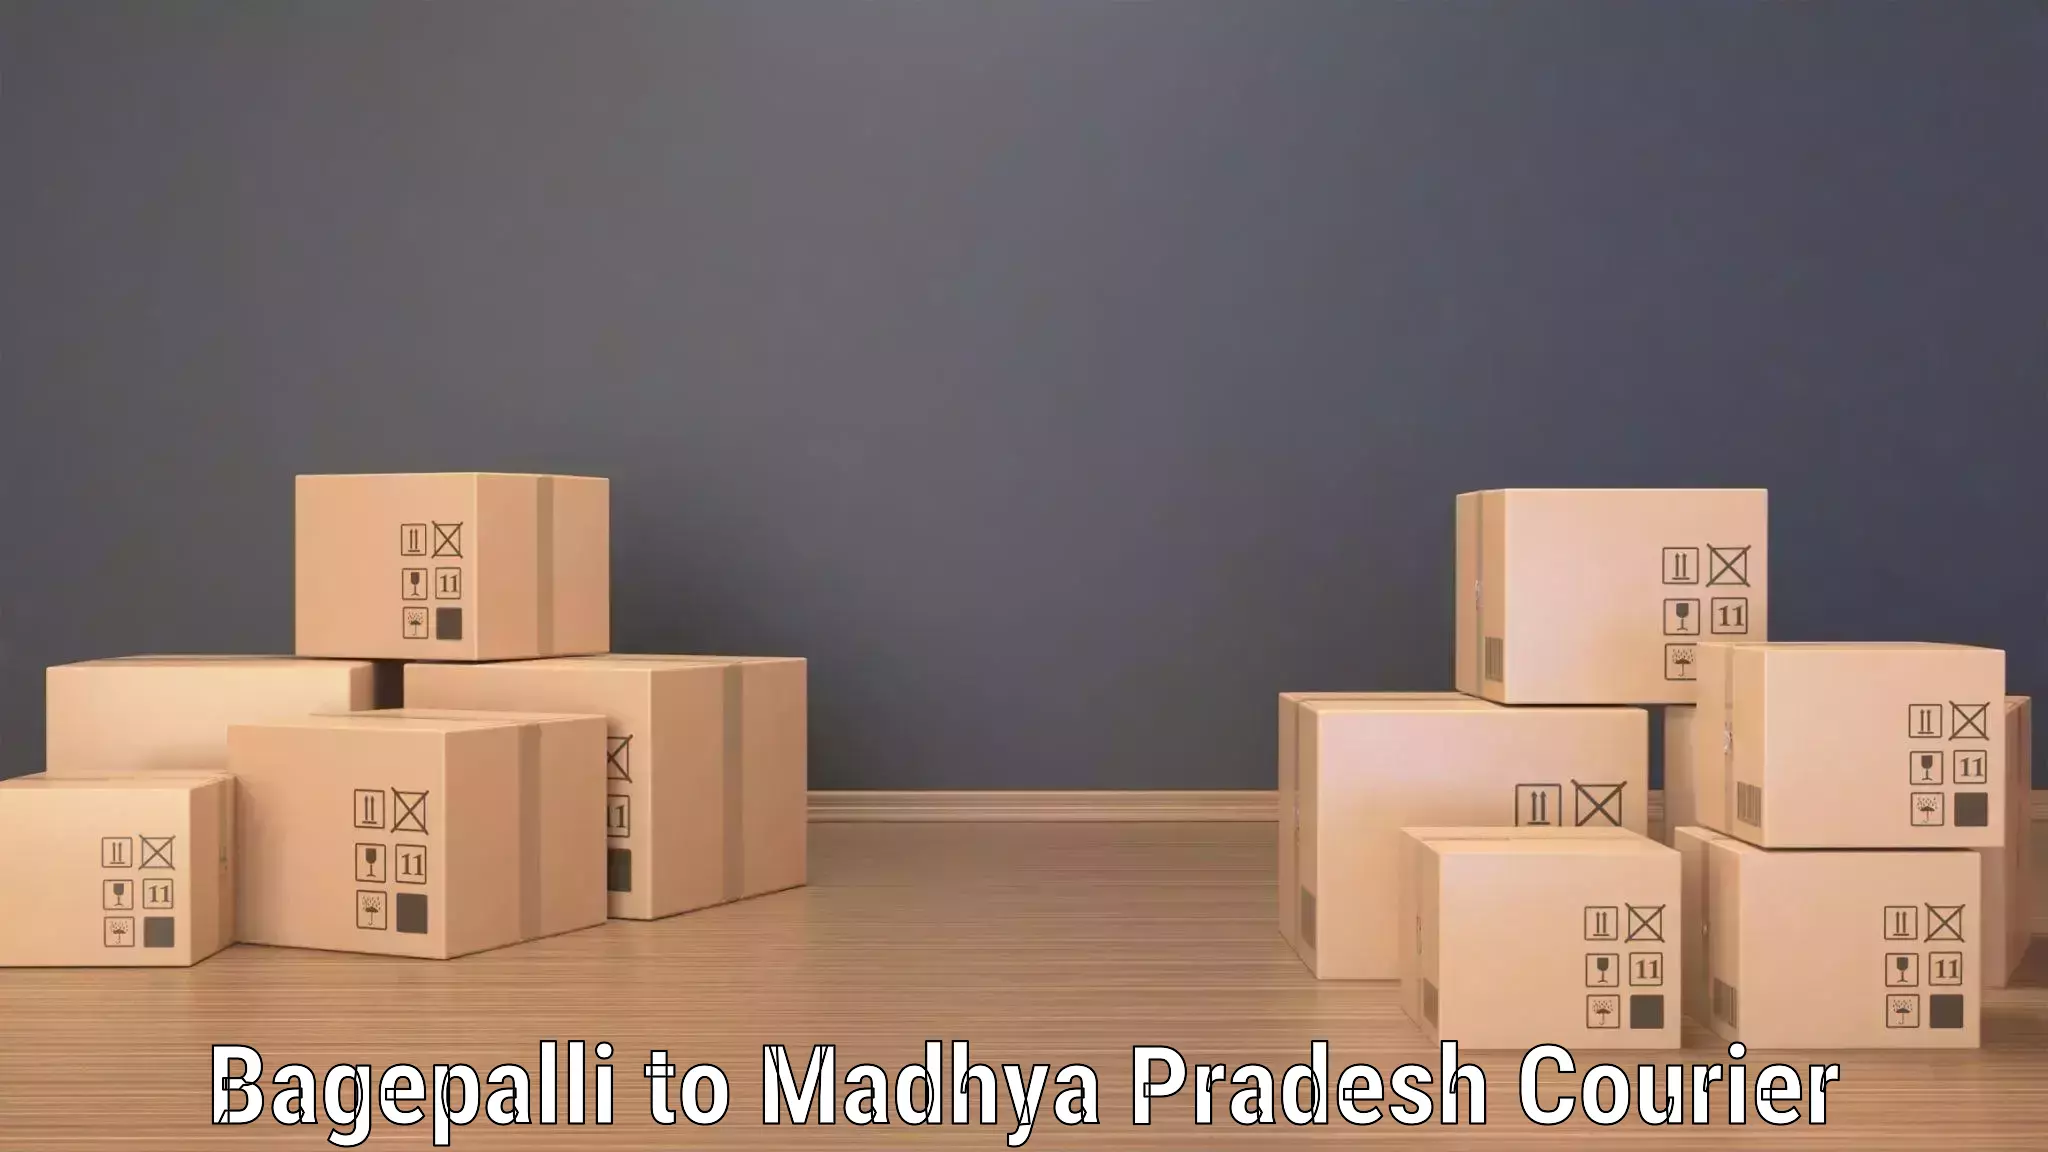 Express mail solutions Bagepalli to Ranchha